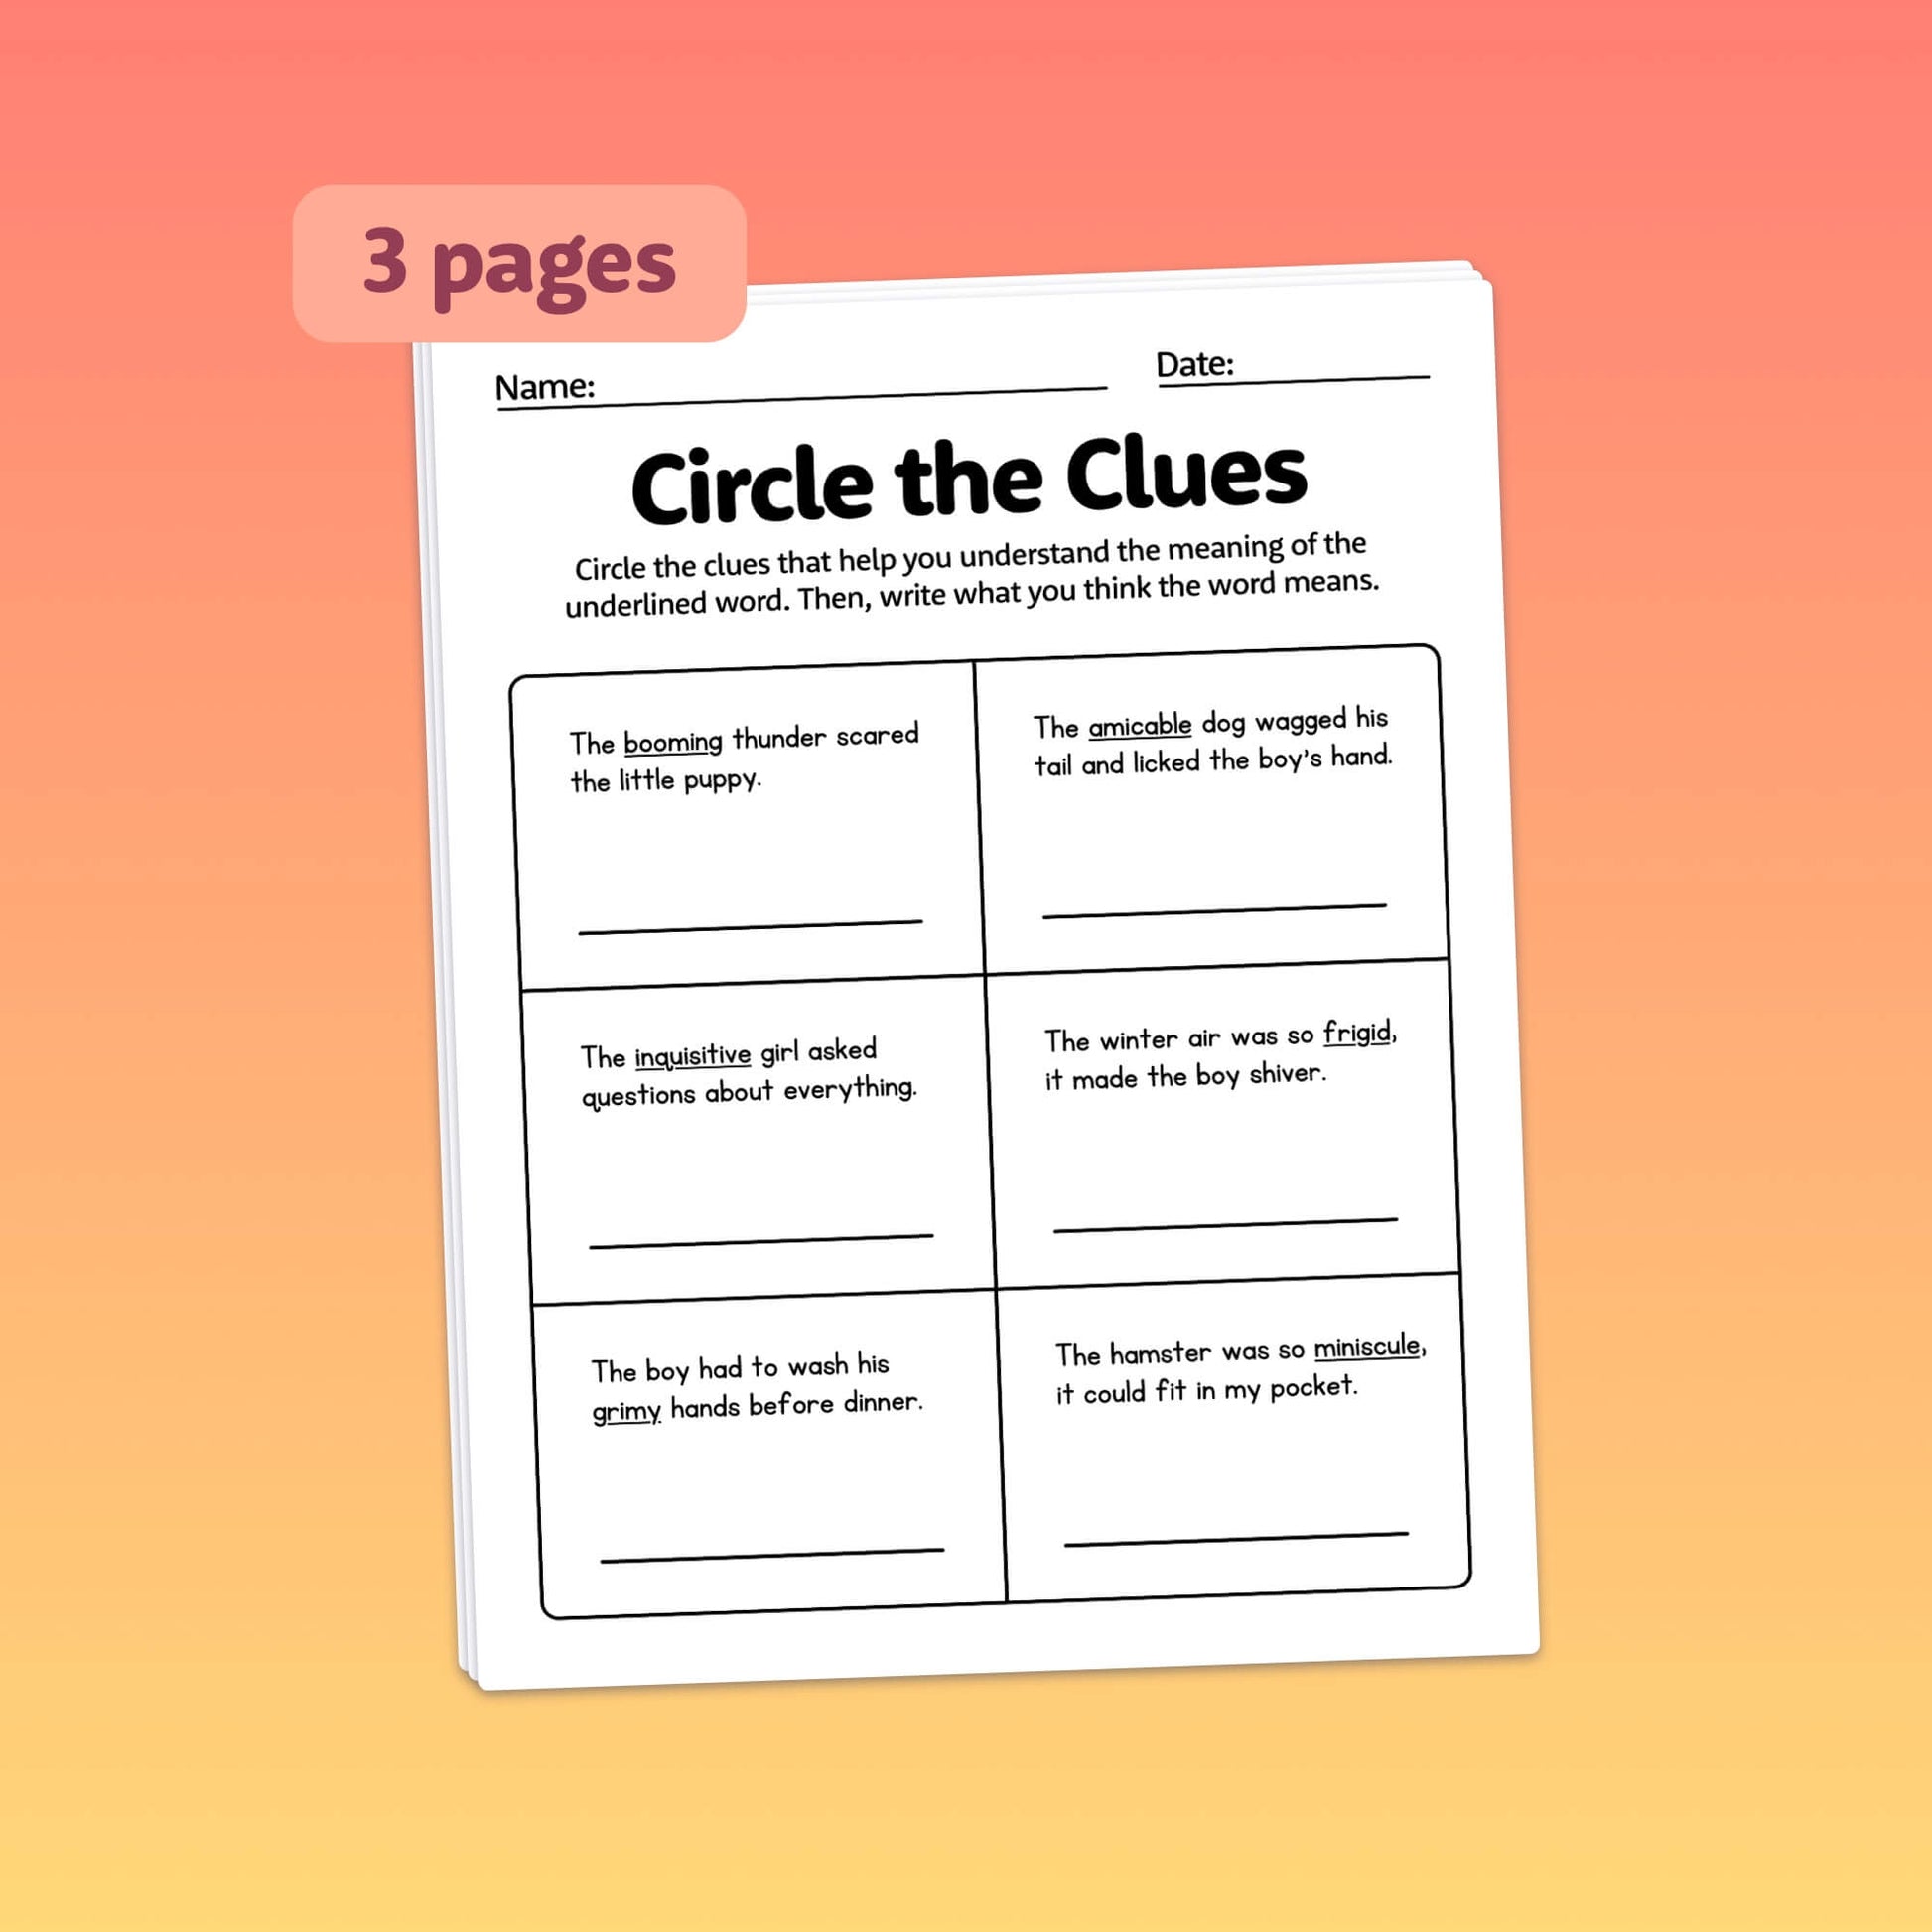 Circle the clues: Context clues assessment